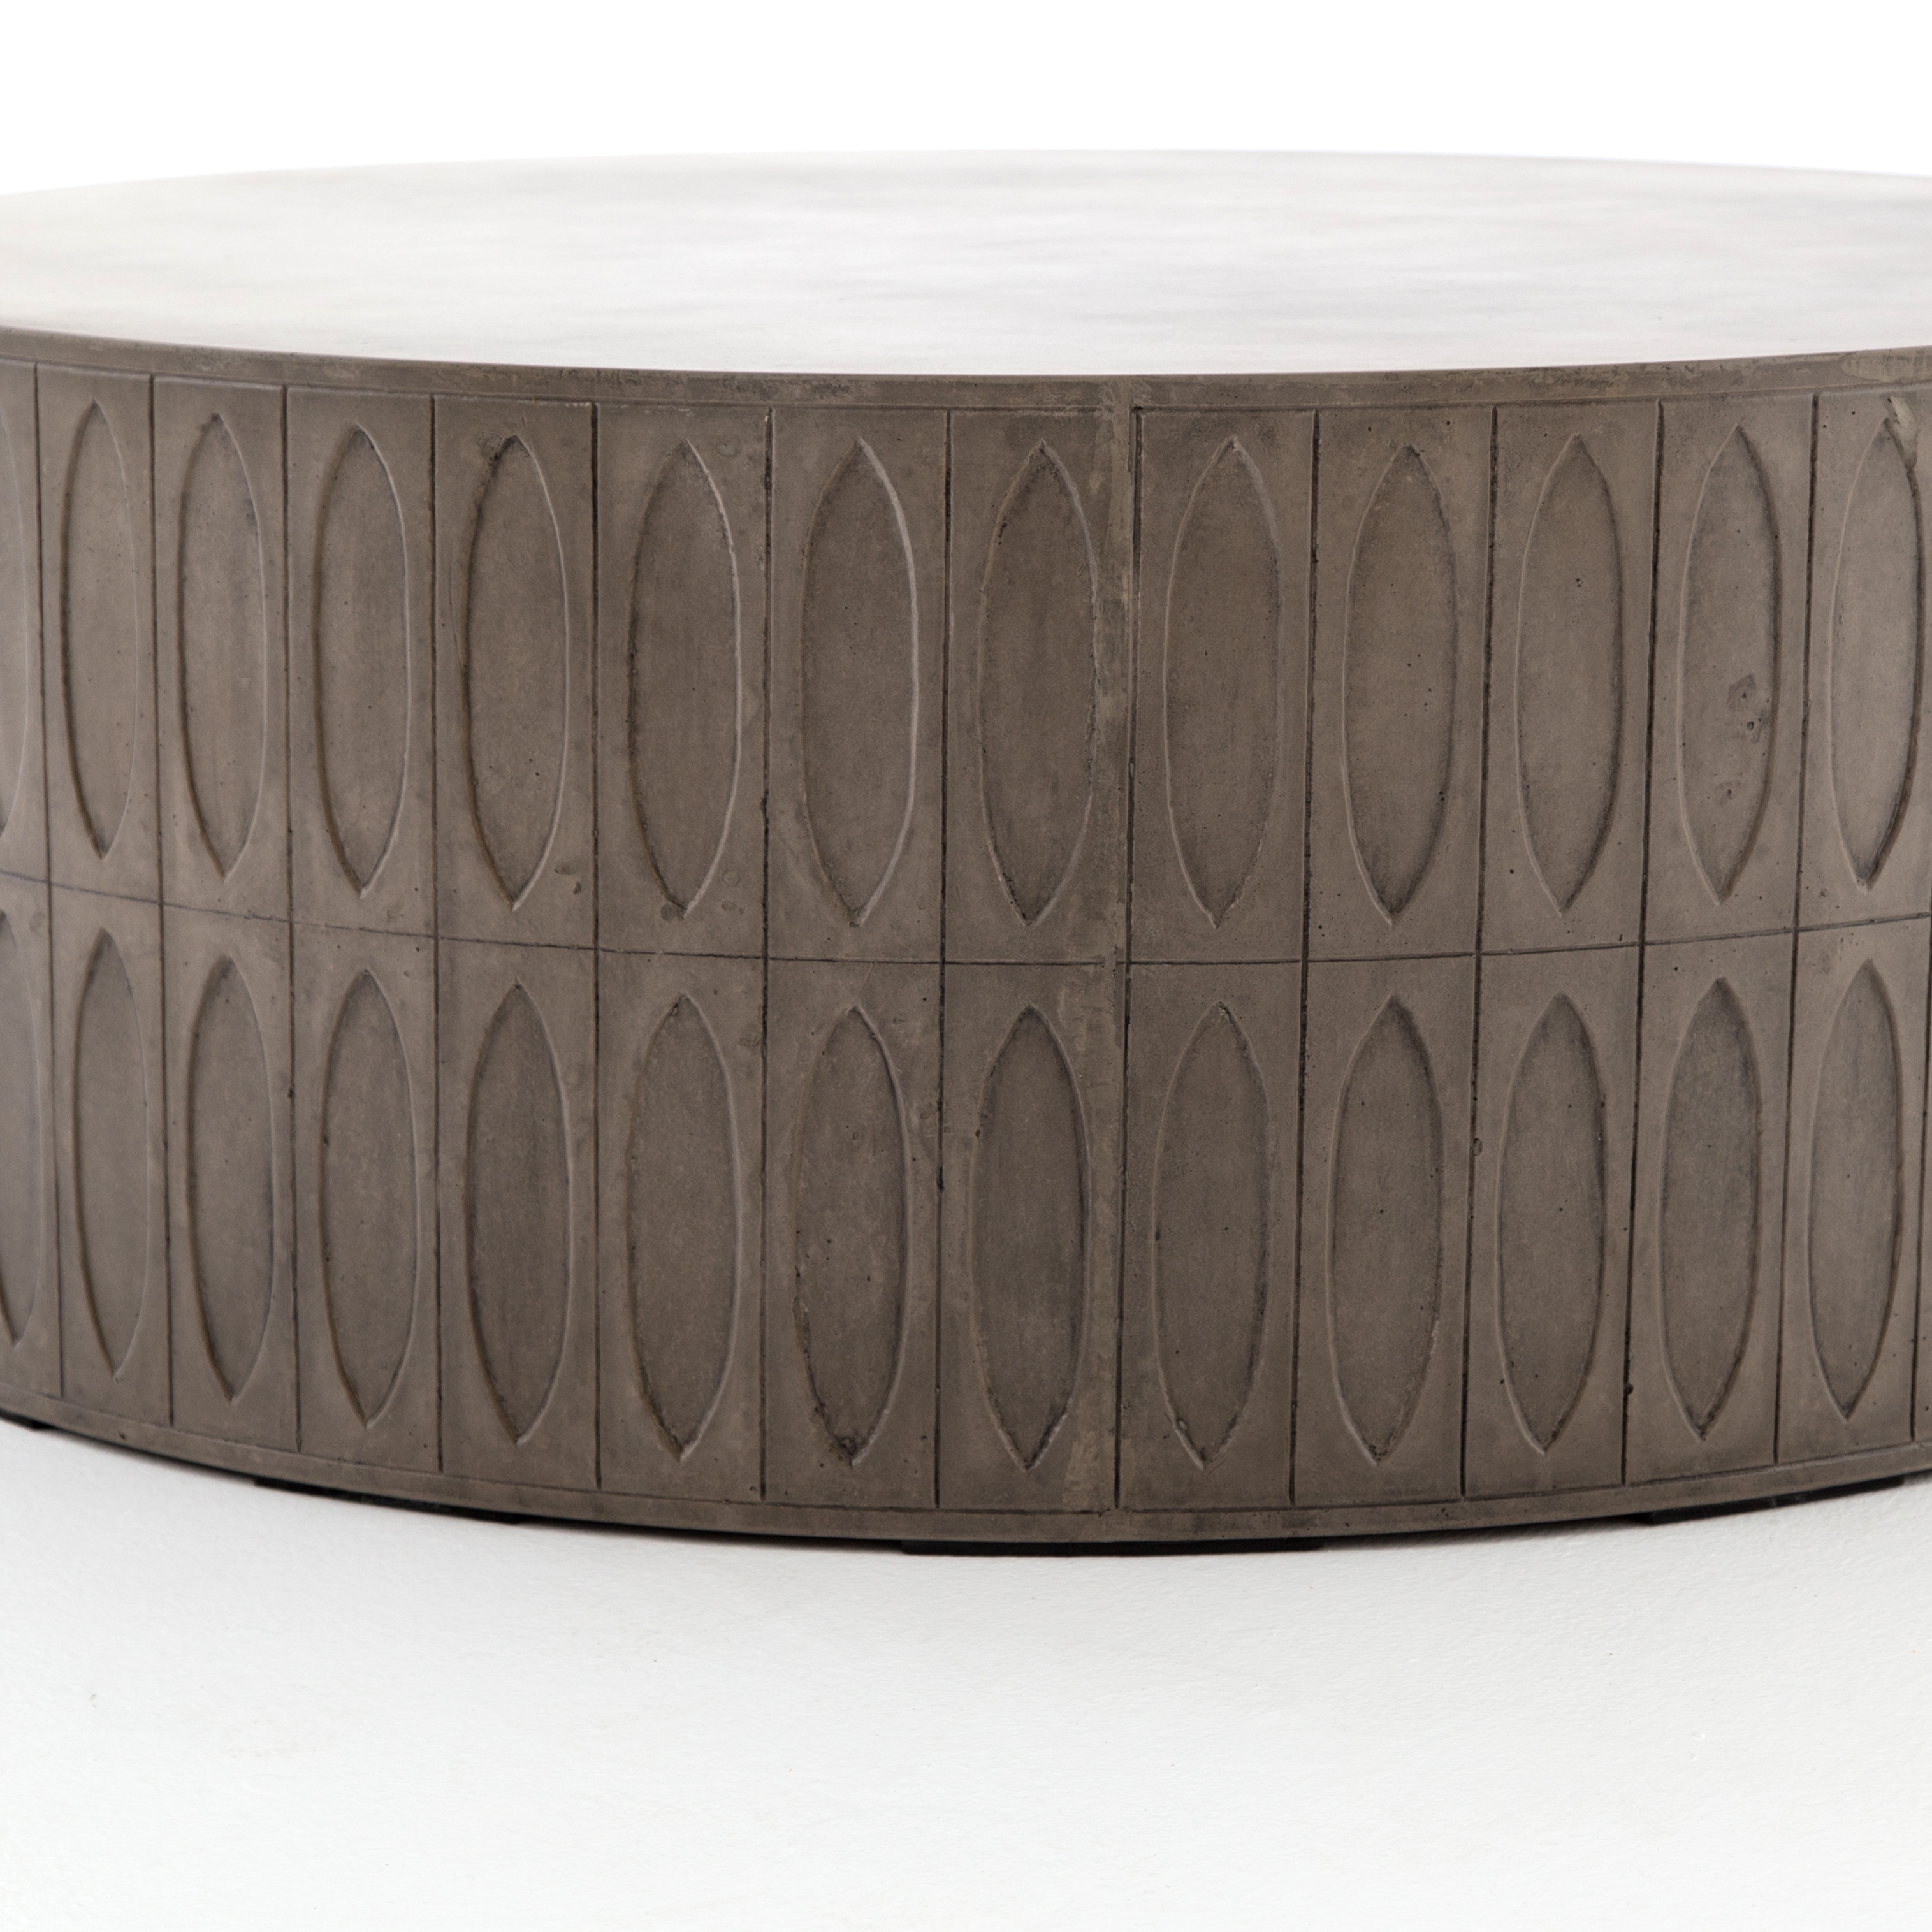 Mal Indoor / Outdoor Round Coffee Table - Image 3